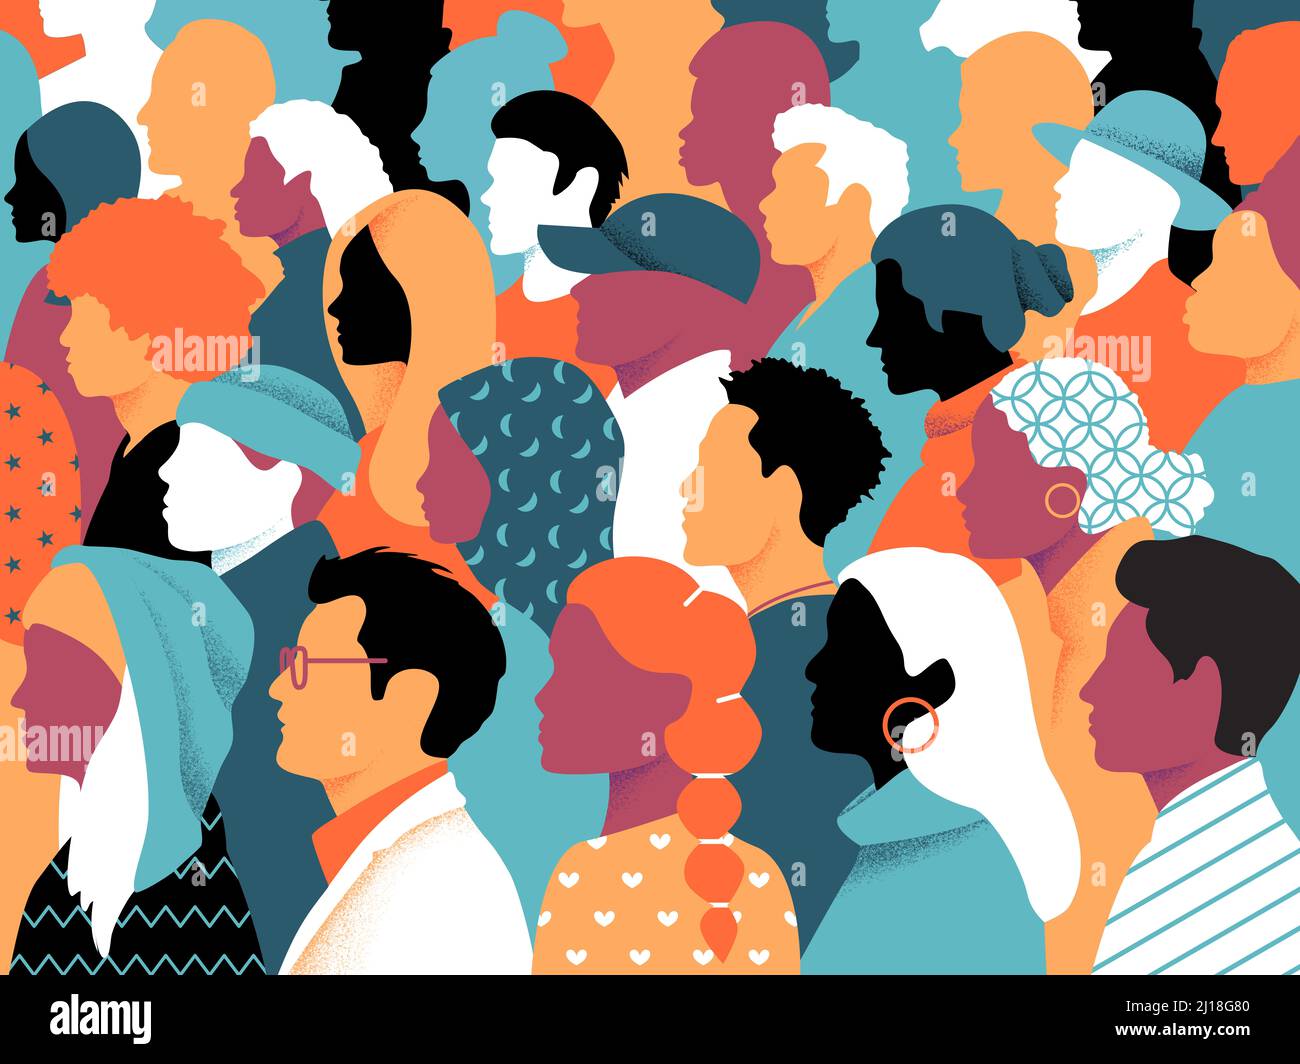 Ethnic group of people profiles illustration. Many faces o people of all races, divers people profile view of men and women, many races, ages. Stock Photo